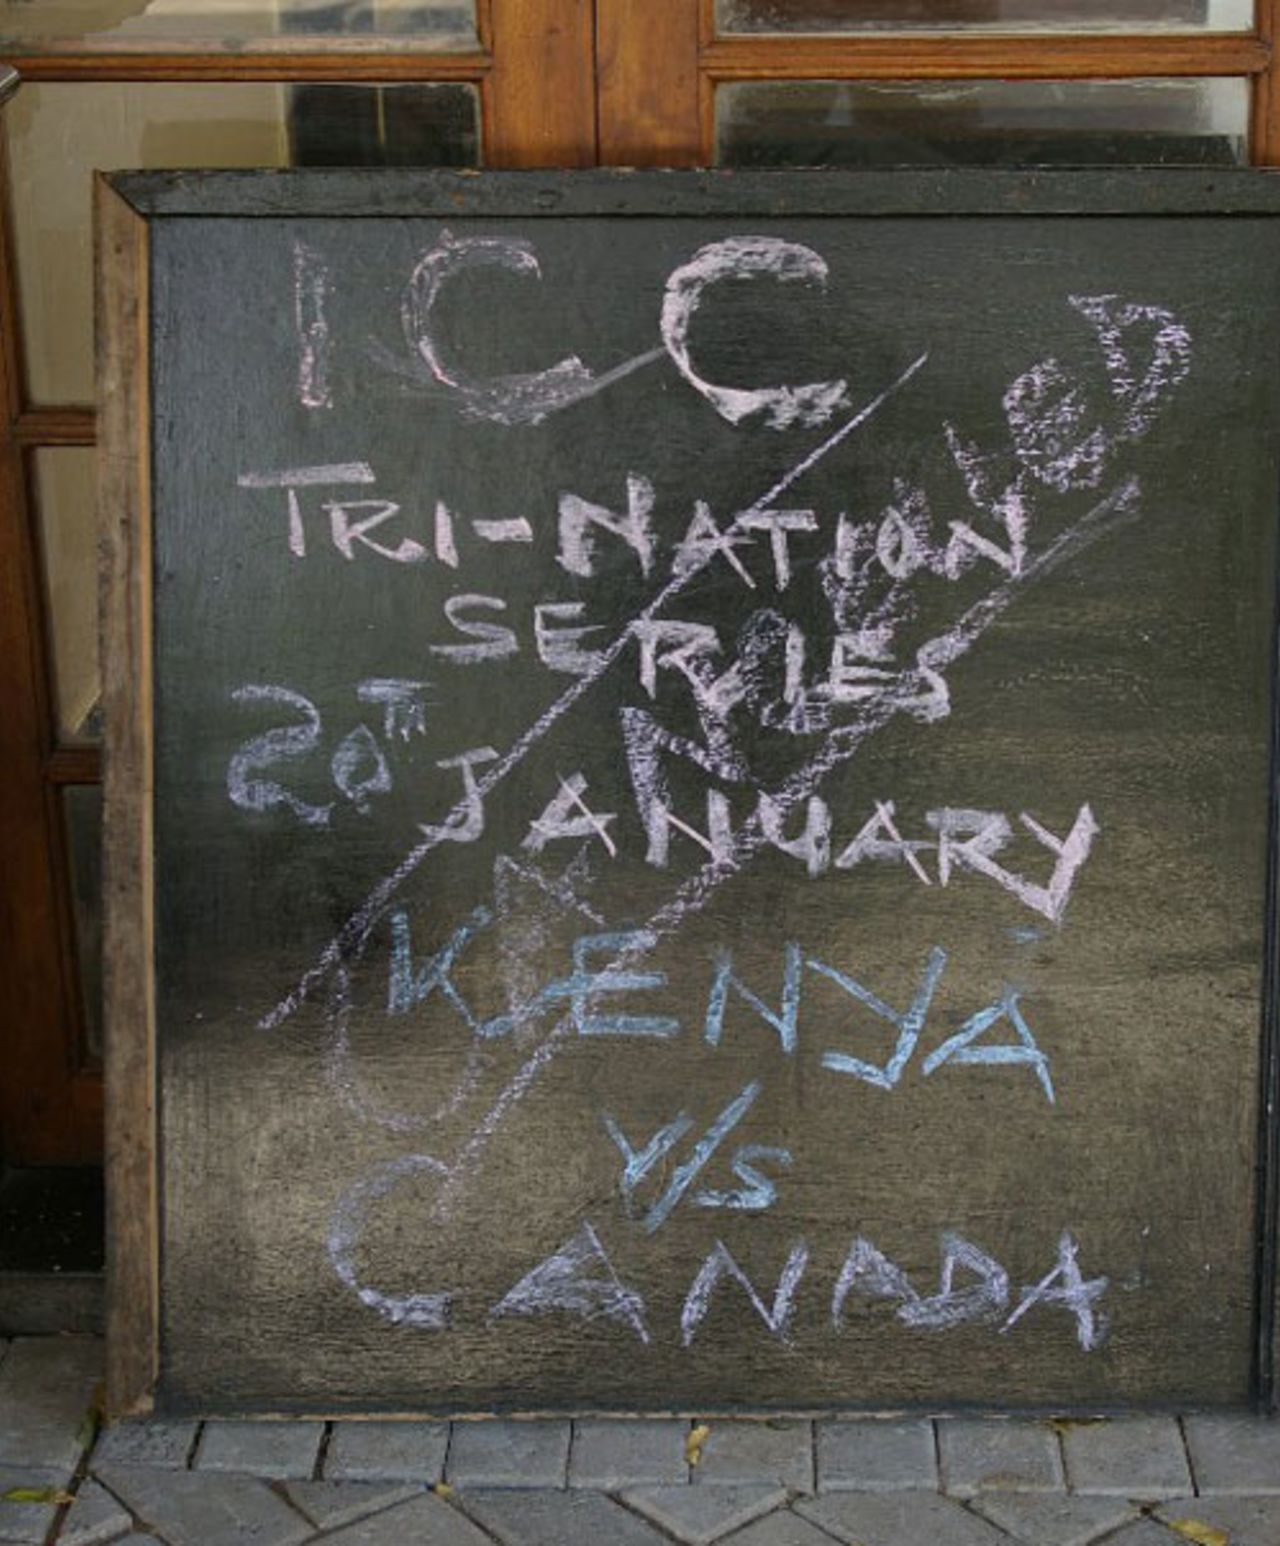 Match cancelled ... a blackboard breaks the bad news that Canada had pulled out of the ODI against Kenya because of illness, ICC Tri-Series, Mombasa, January 21, 2007